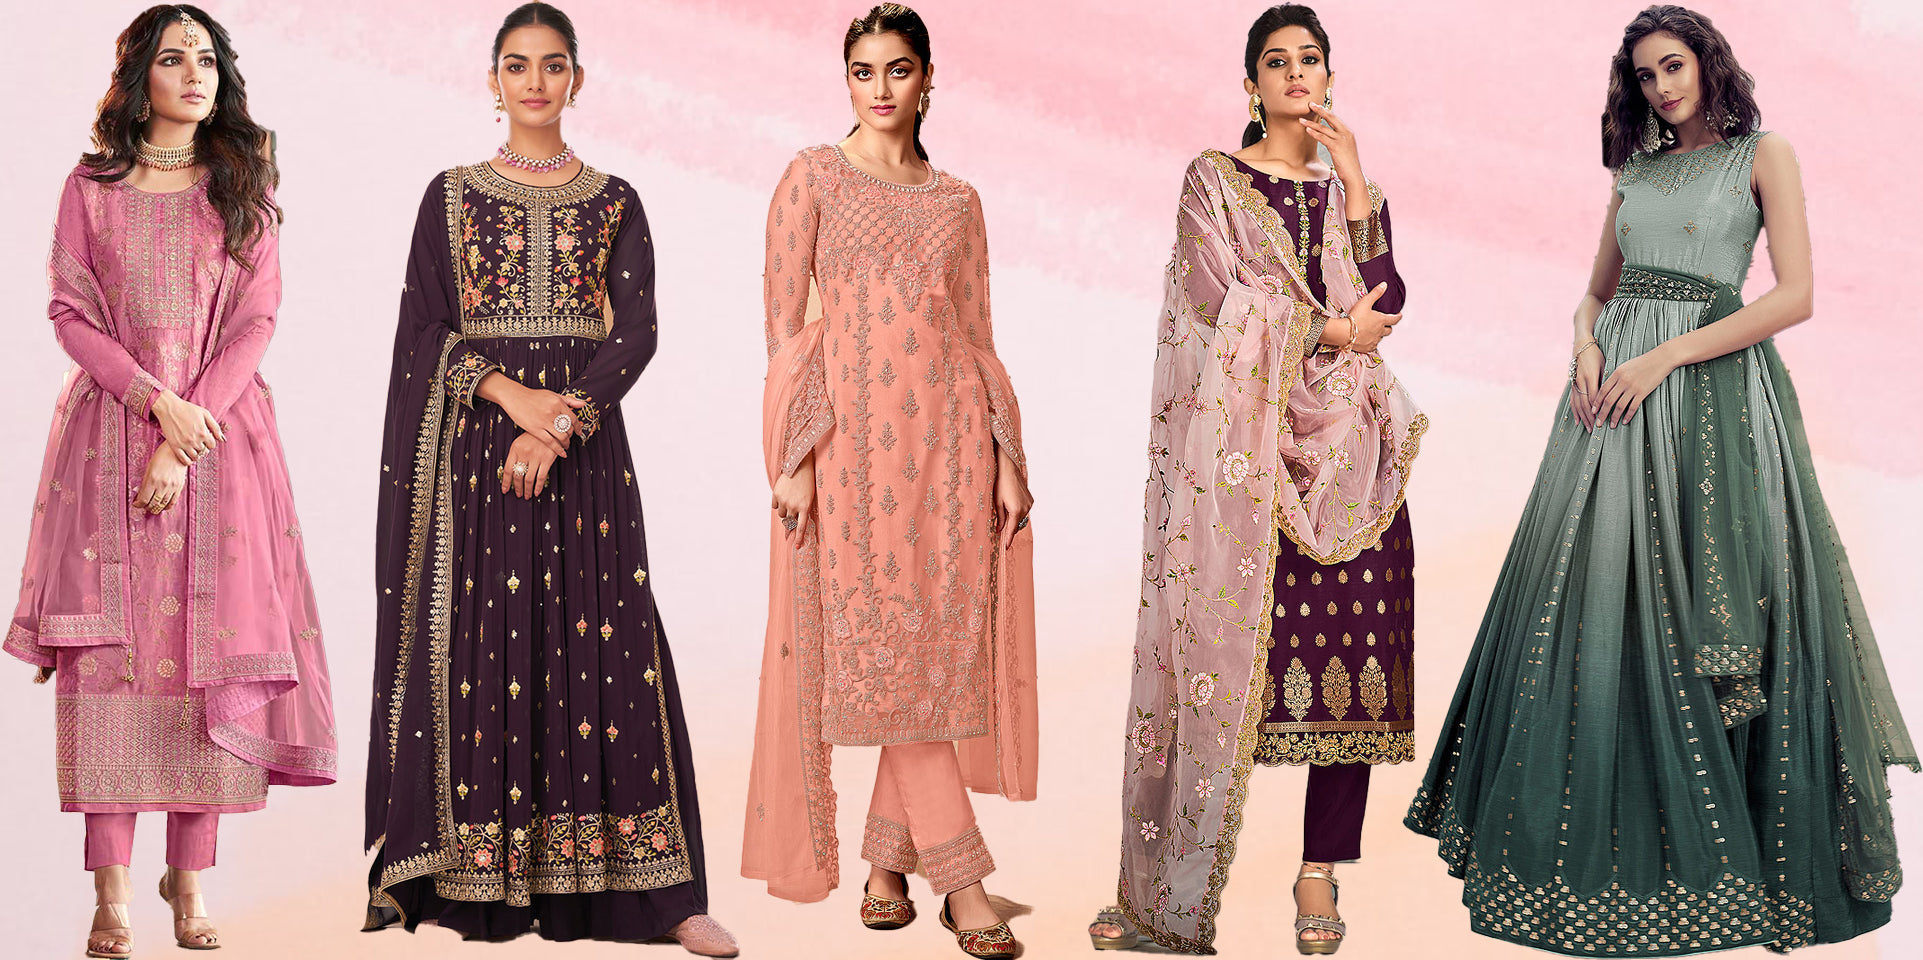 How To Look Stylish In Traditional Indian Clothing Where To Buy Them